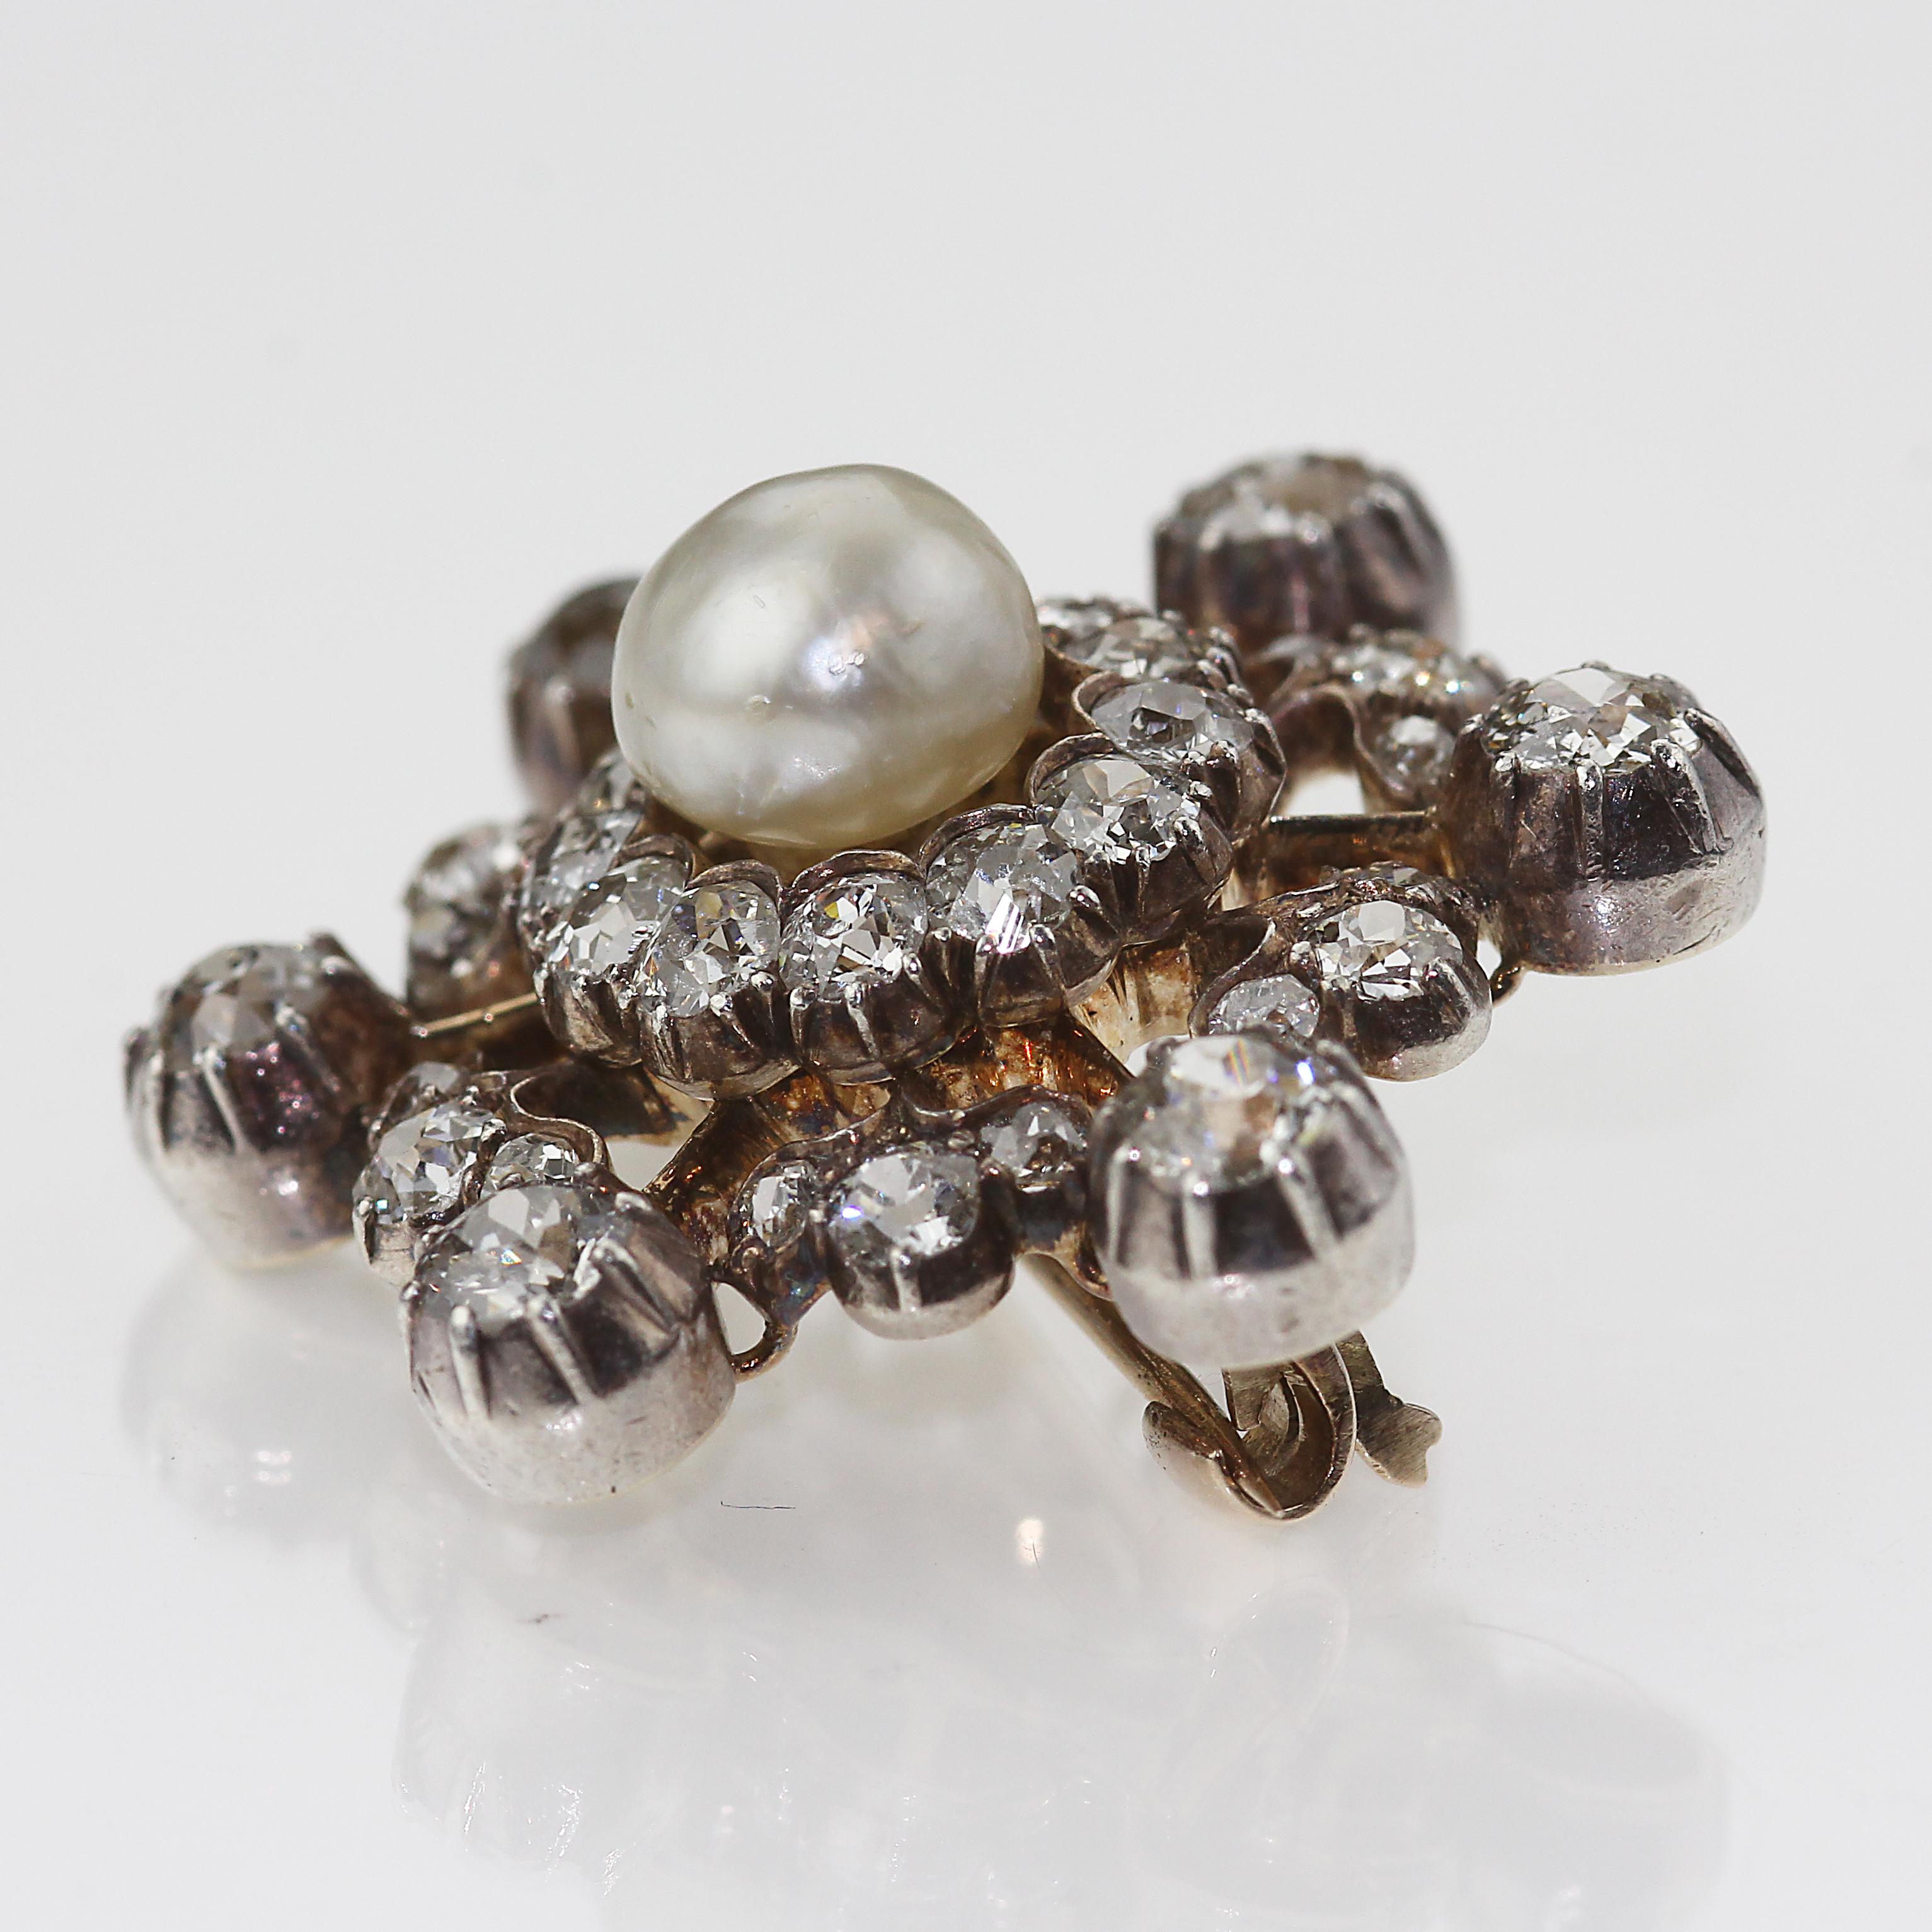 Victorian Natural Pearl and Diamond Snowflake brooch set in gold and silver.
Resembling an ever so delicate snowflake is this intricate brooch. It’s an antique Victorian stunner full of diamonds all formatted around a natural pearl, all on a gold